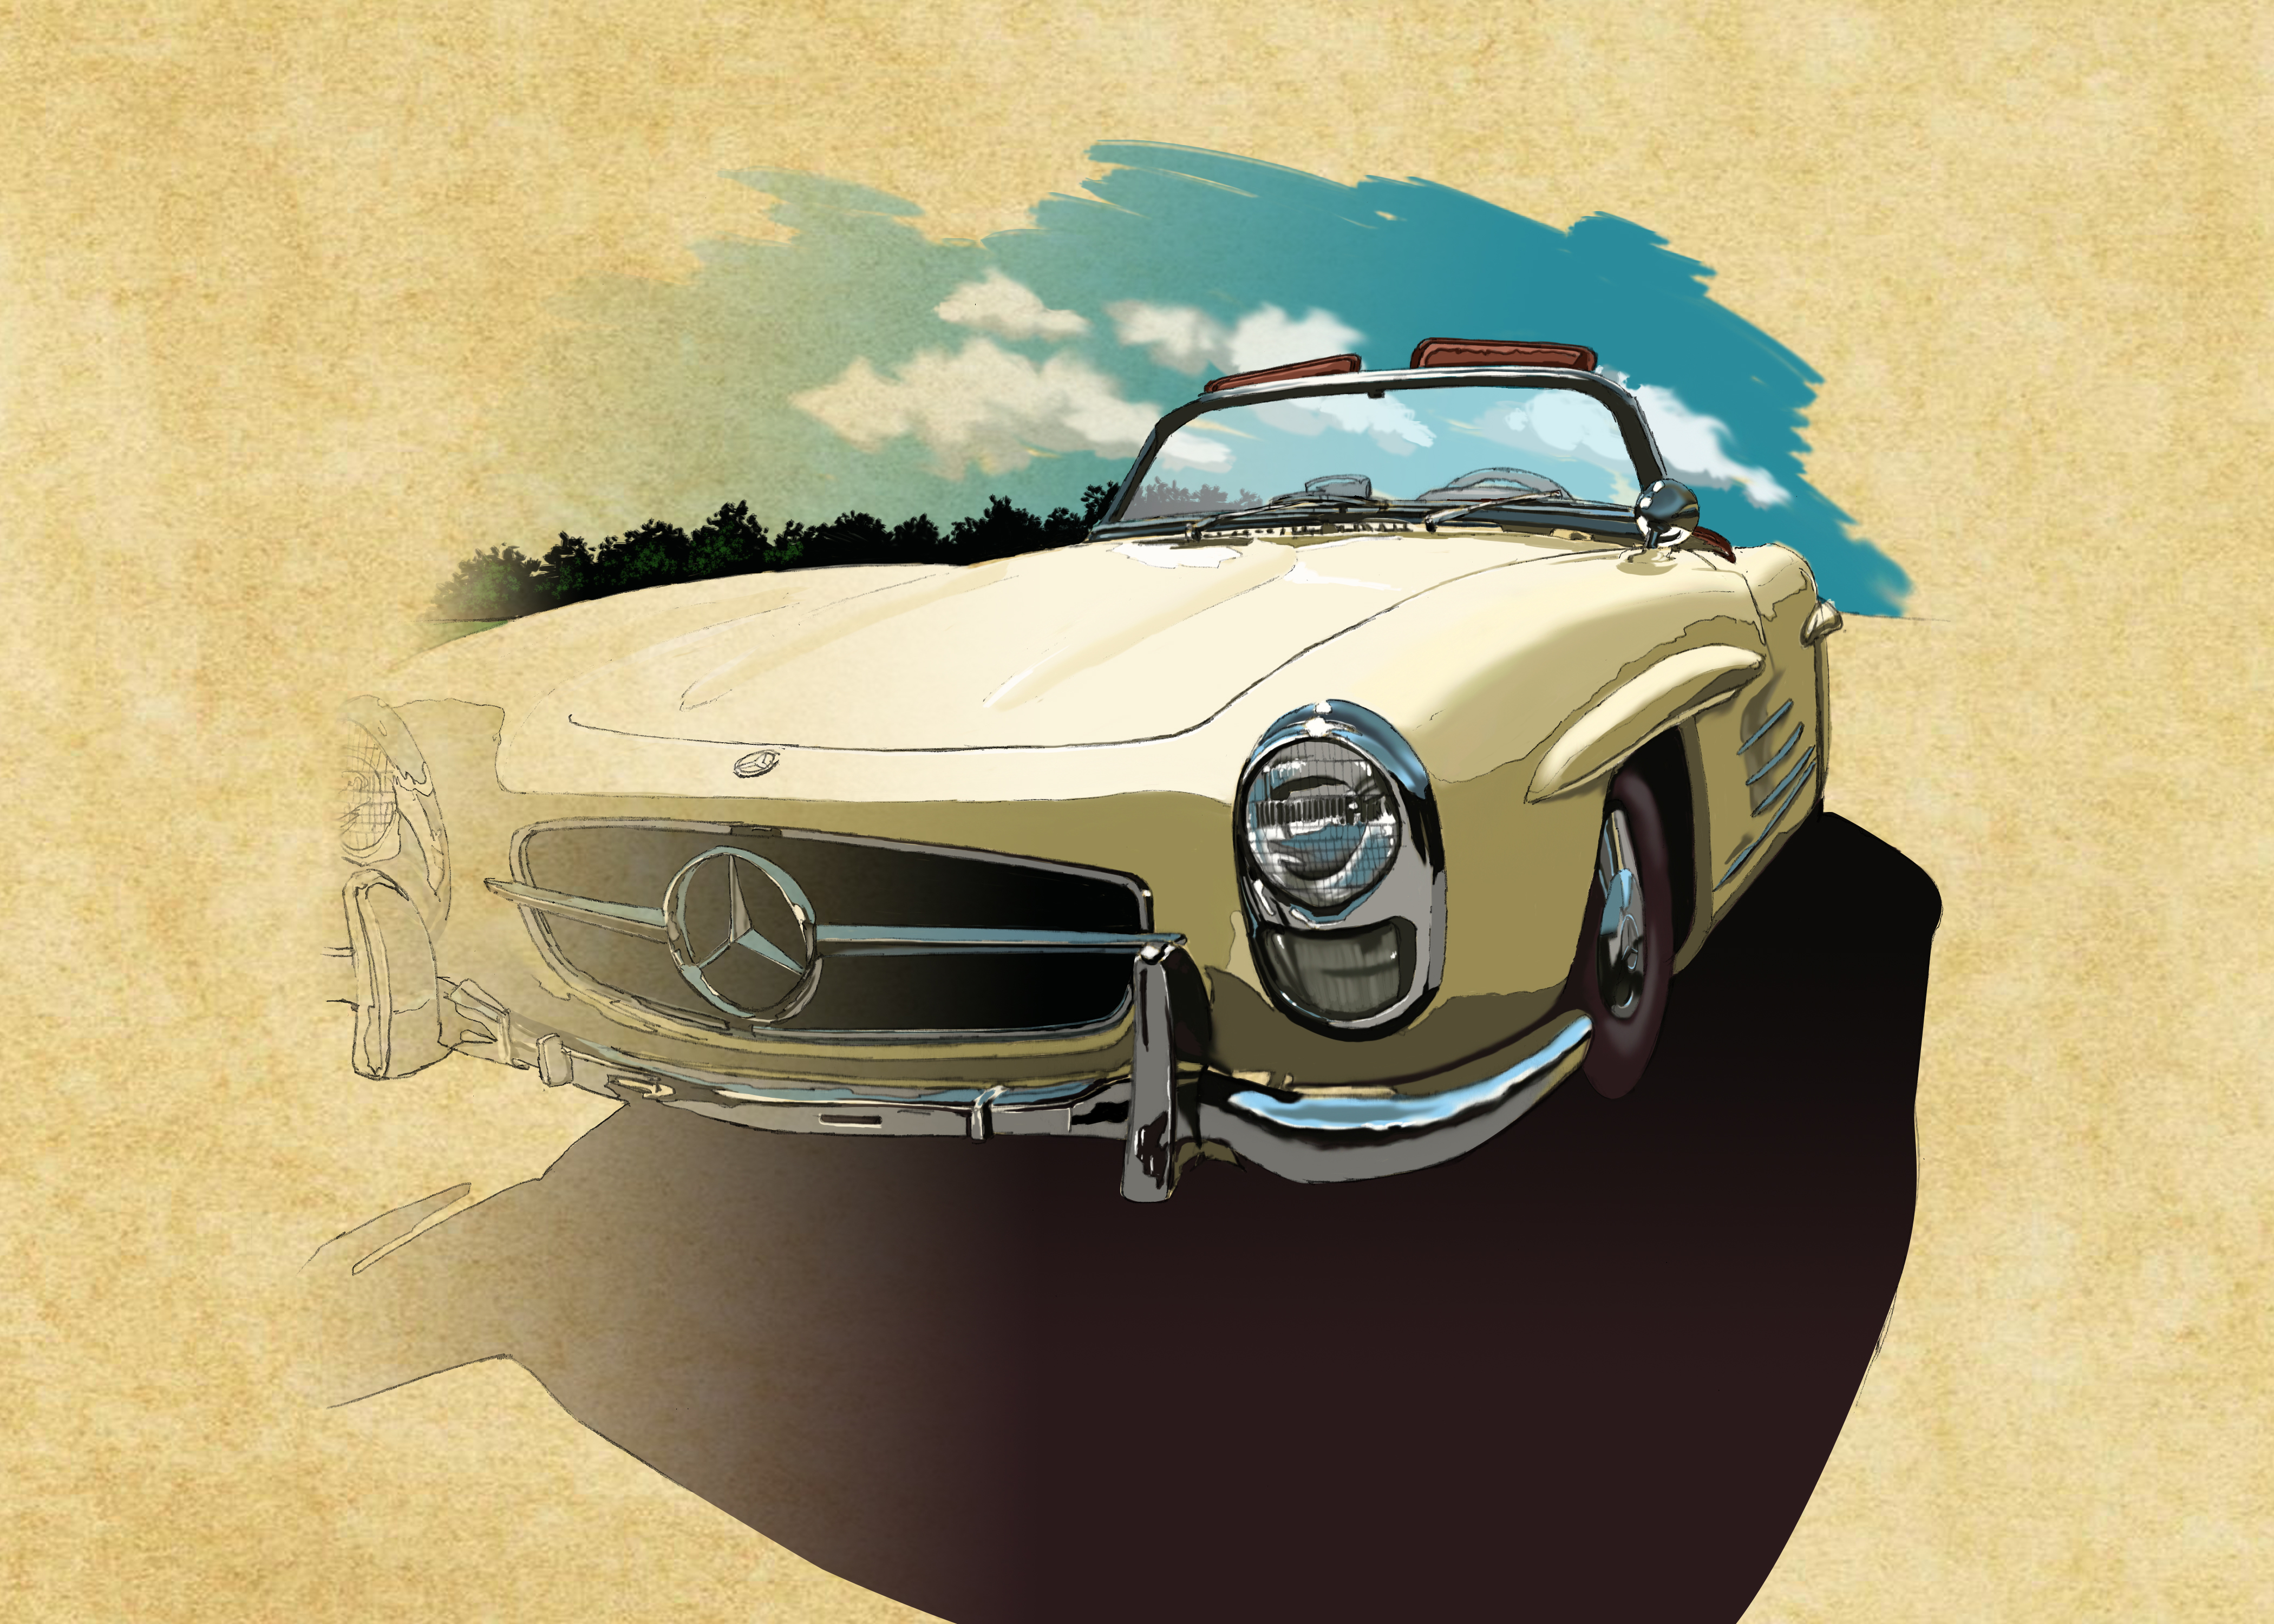 Mercedes Benz classic convertible. Painted in Photoshop, with pencil drawing.